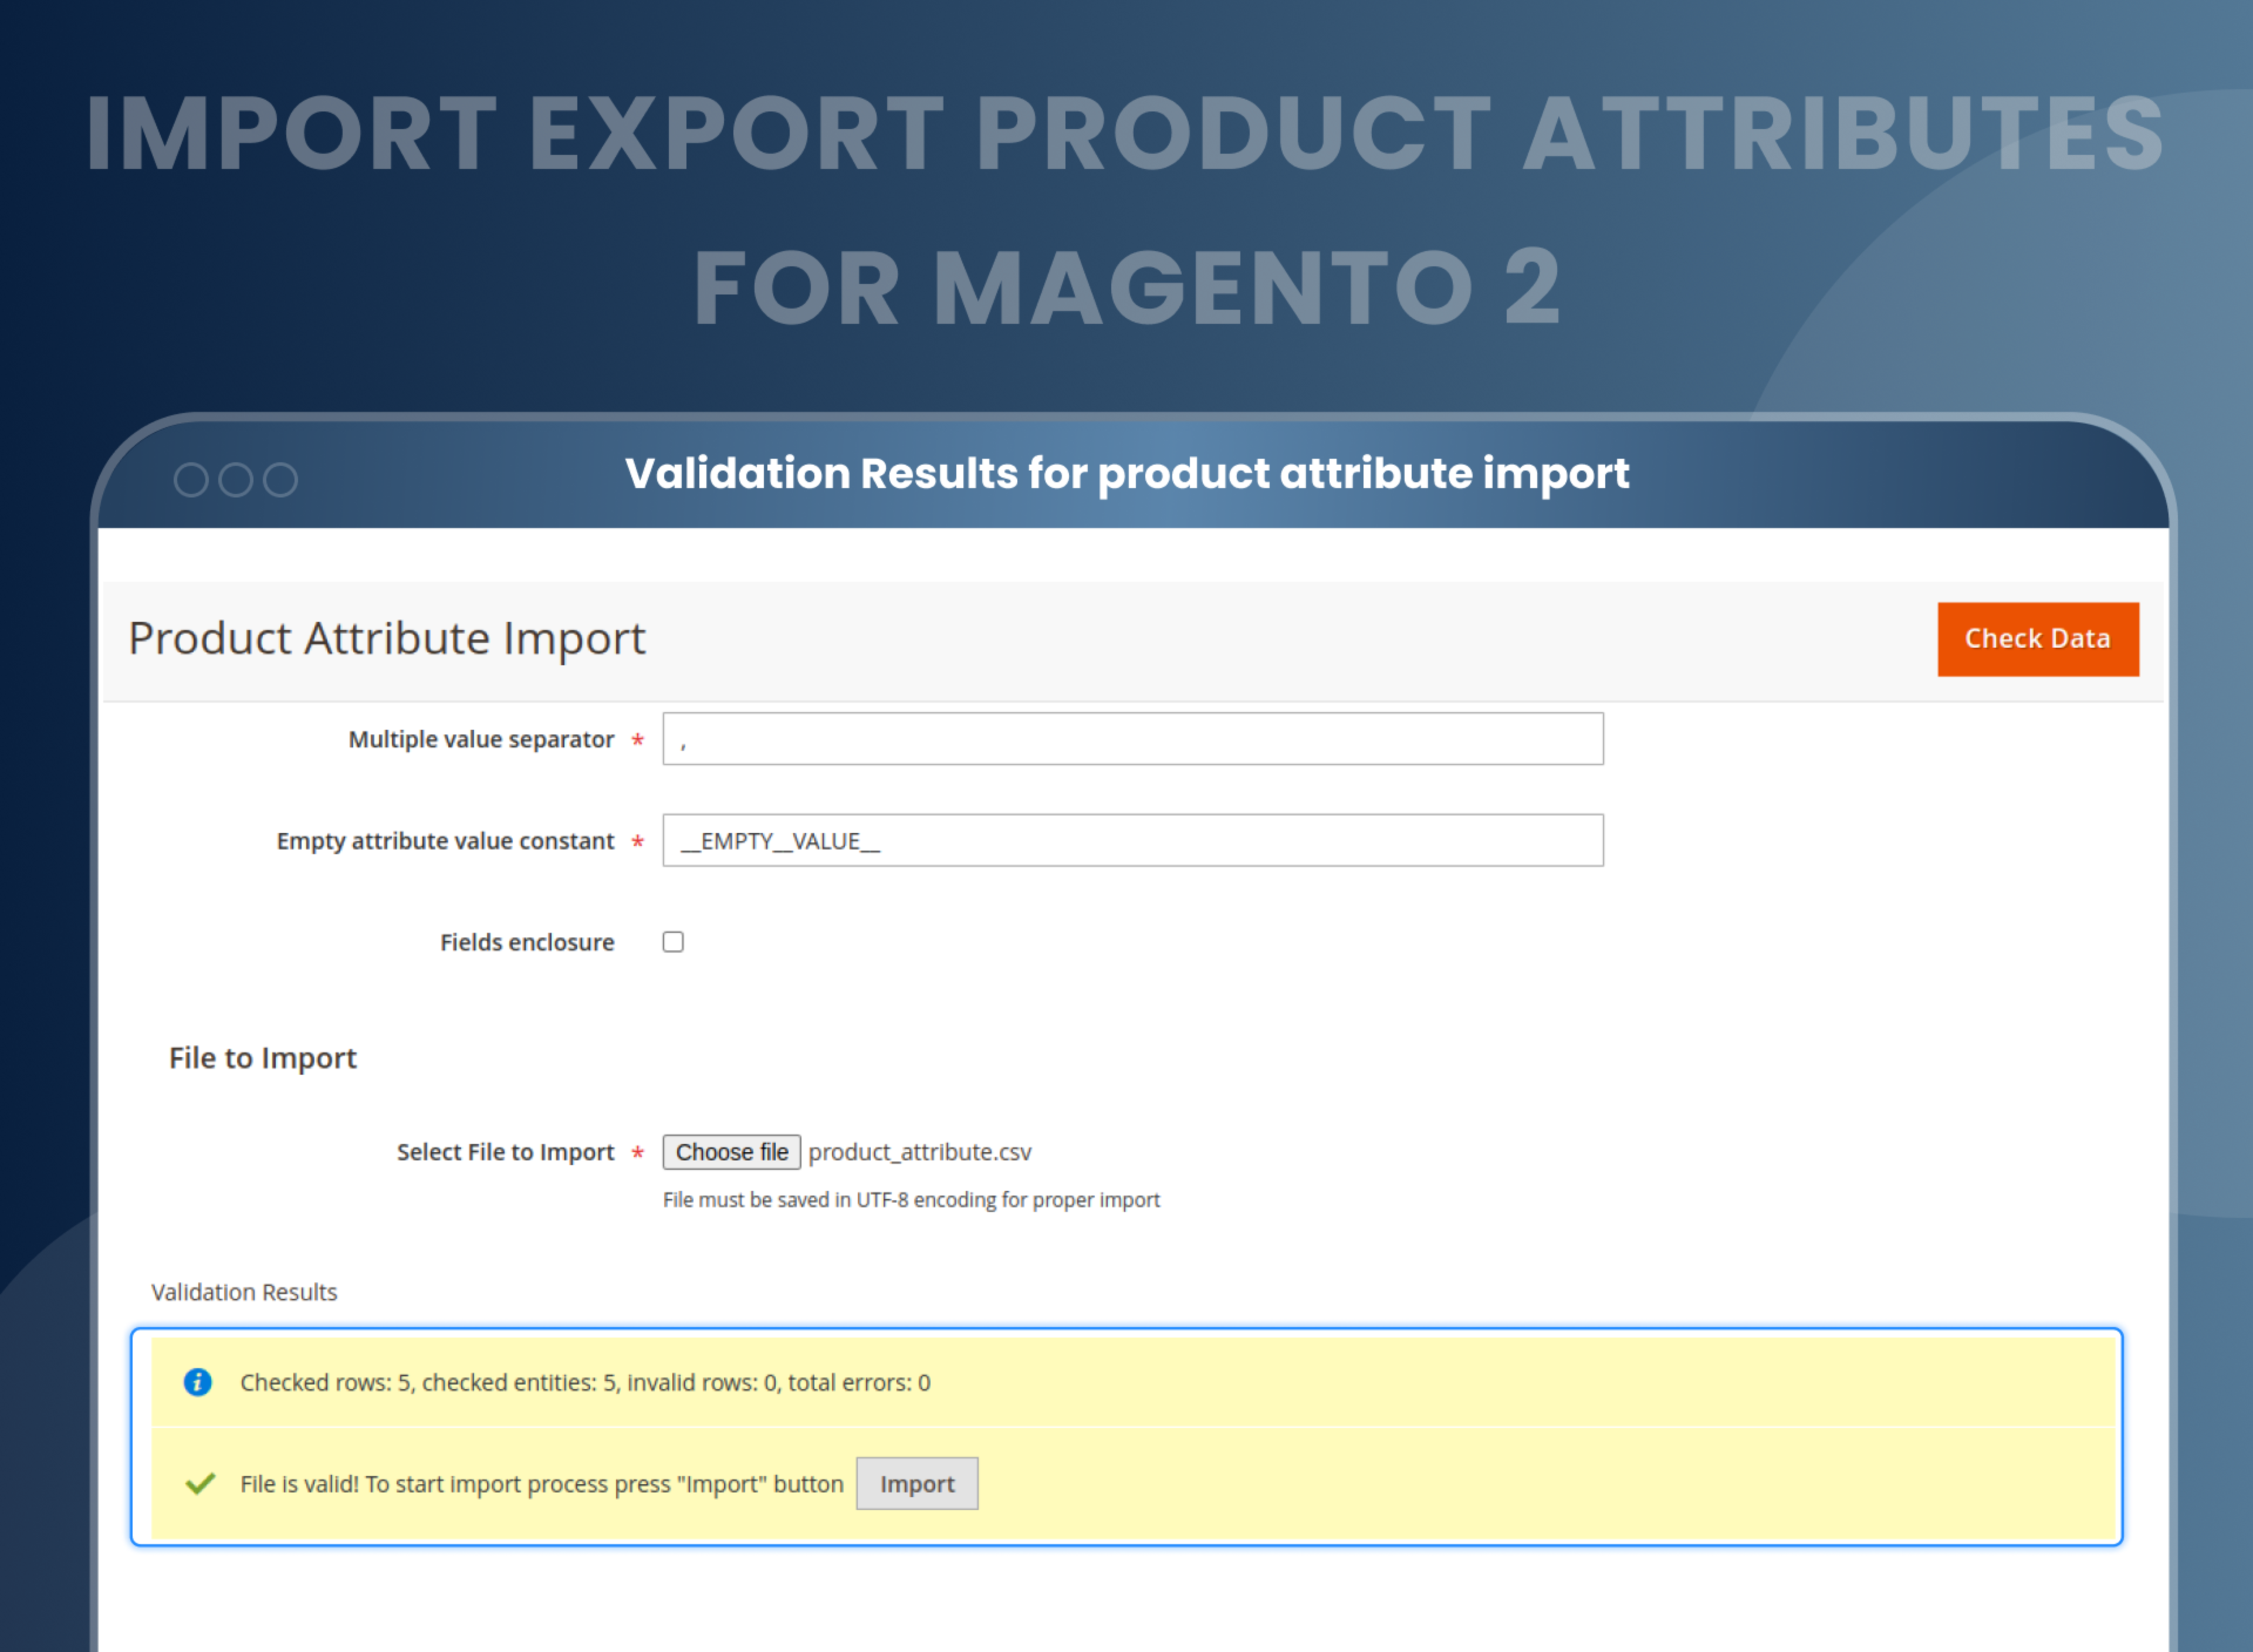 Validation Results for product attribute import